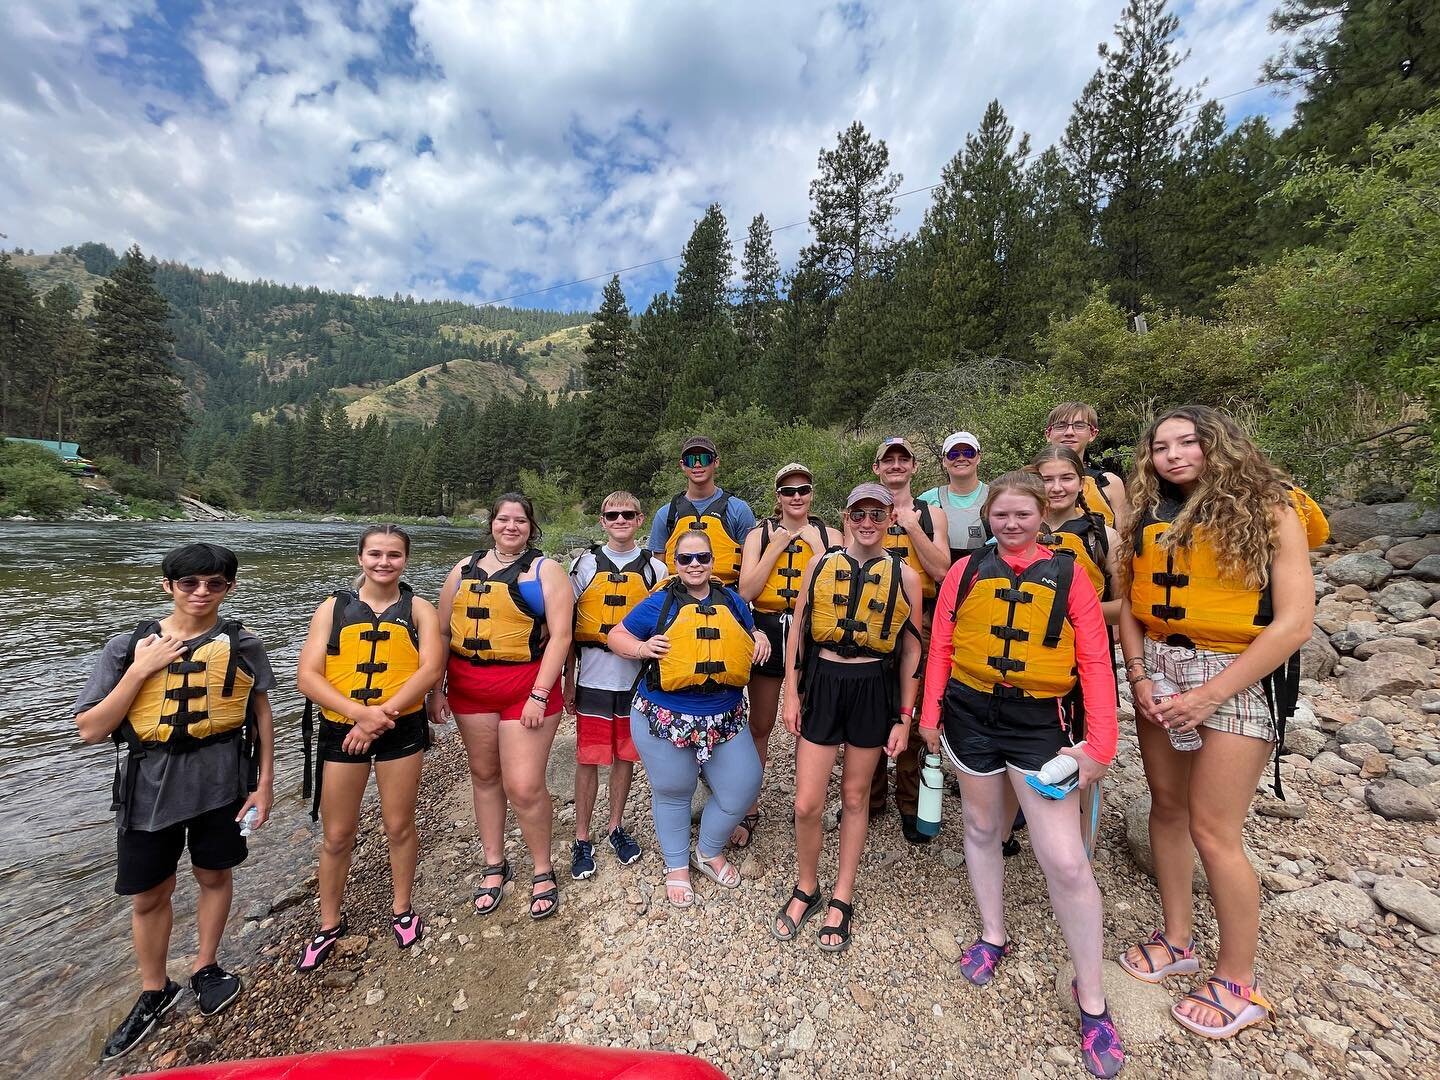 Fun times Rafting the Payette yesterday! Such a great way to end the summer:-)
#truehopedowntownstudents #truehopedowntown